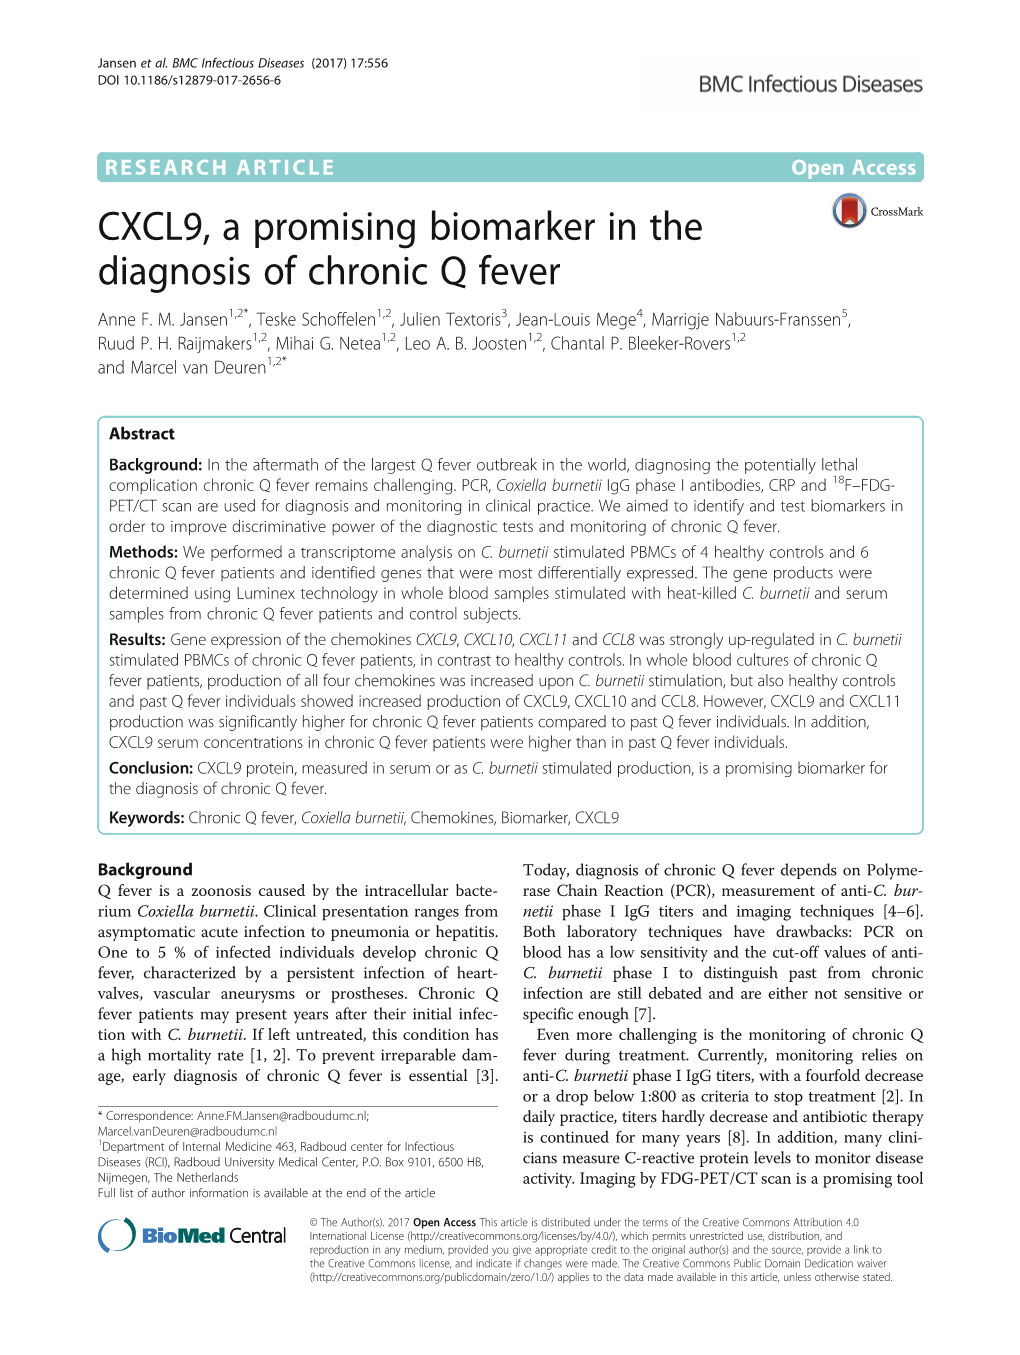 CXCL9, a Promising Biomarker in the Diagnosis of Chronic Q Fever Anne F